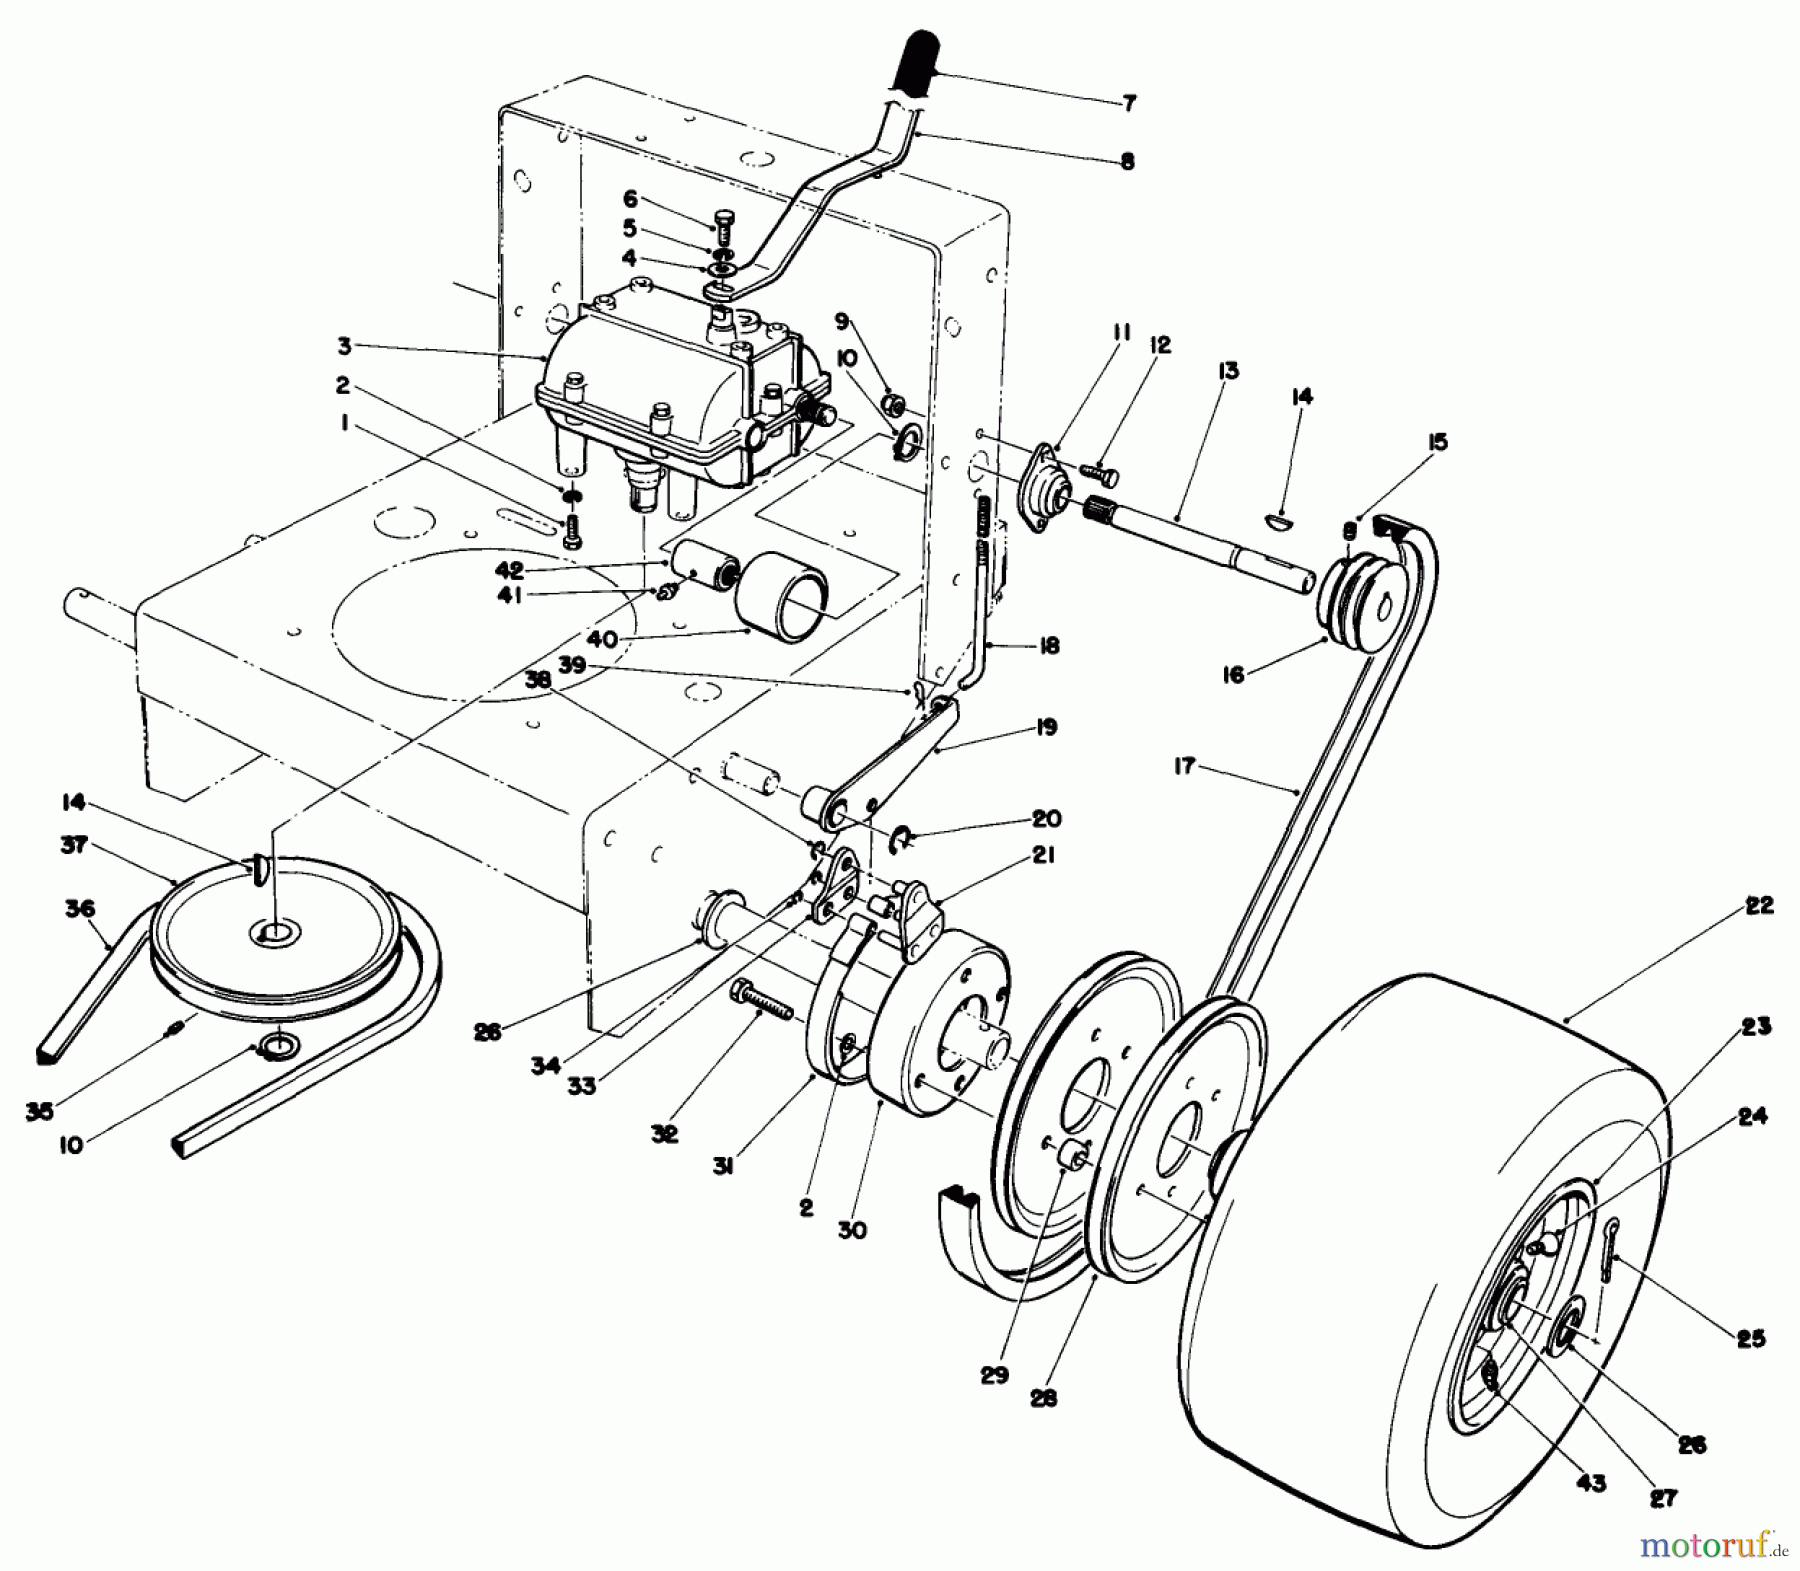  Toro Neu Mowers, Drive Unit Only 30116 - Toro Mid-Size Proline Gear Traction Unit, 16 hp, 1987 (7000001-7999999) AXLE ASSEMBLY